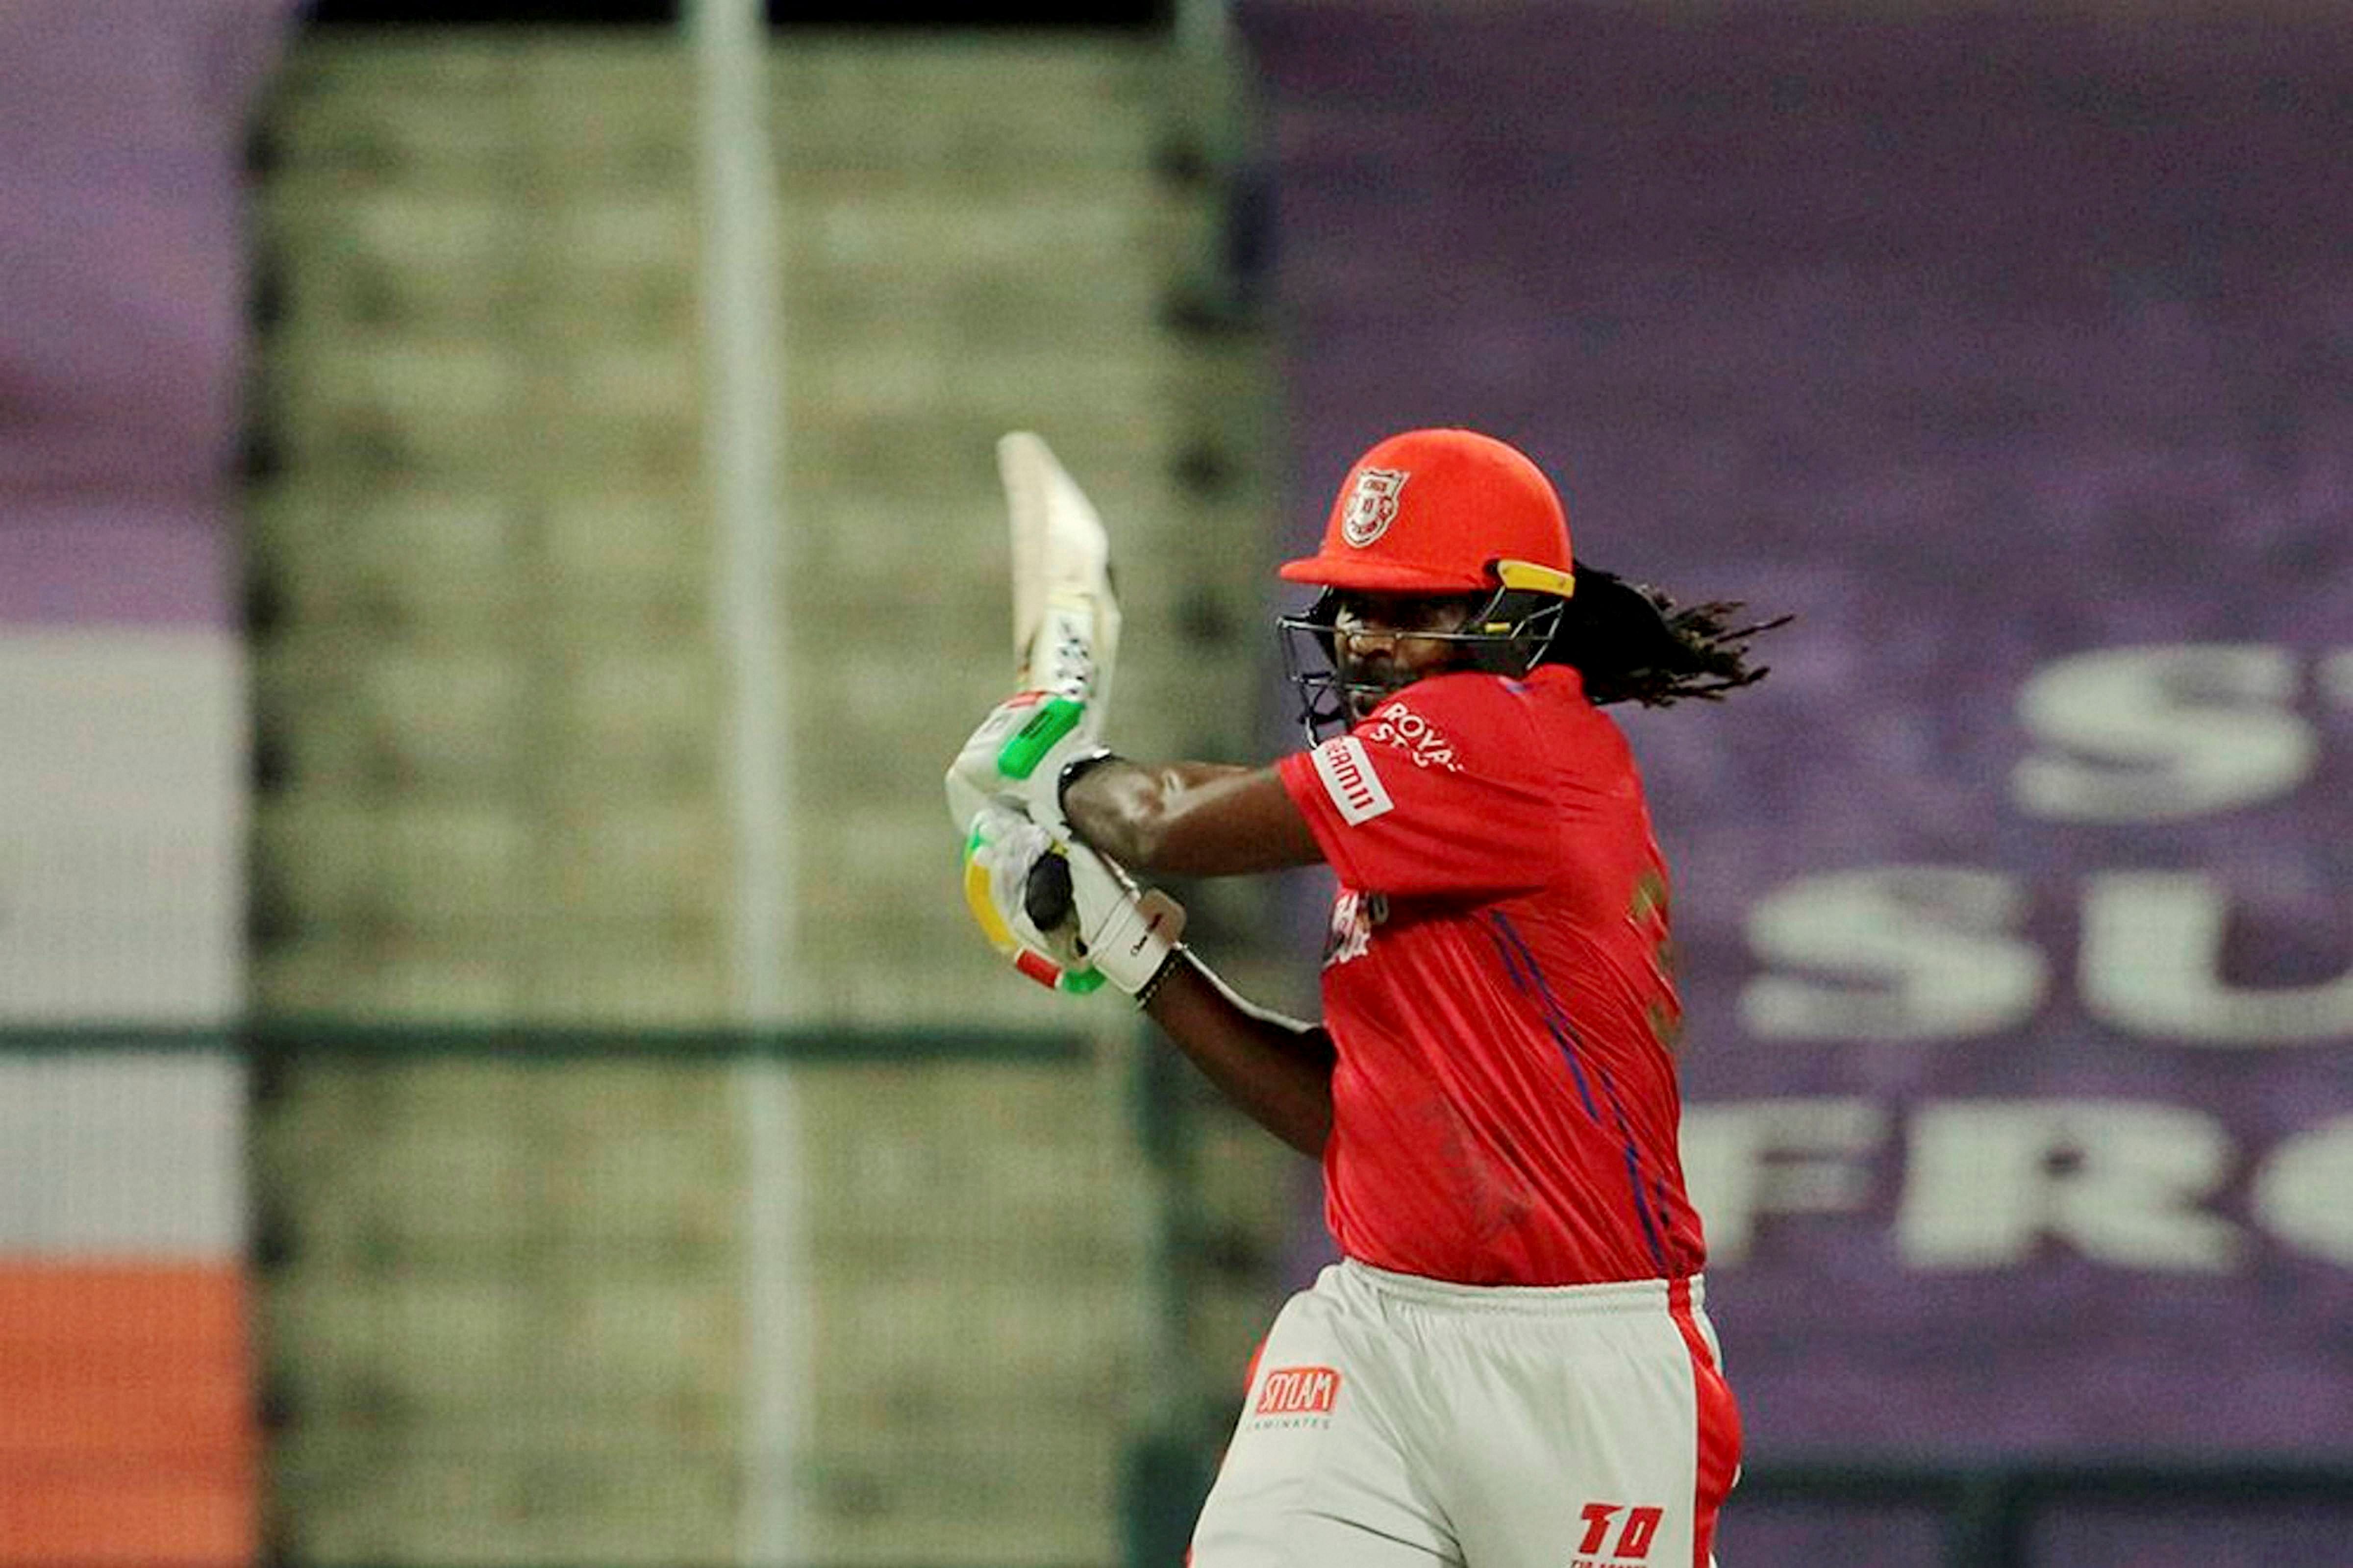 Chris Gayle of Kings XI Punjab plays a shot during the Indian Premier League (IPL) cricket match against Rajasthan Royals. Credits: PTI Photo